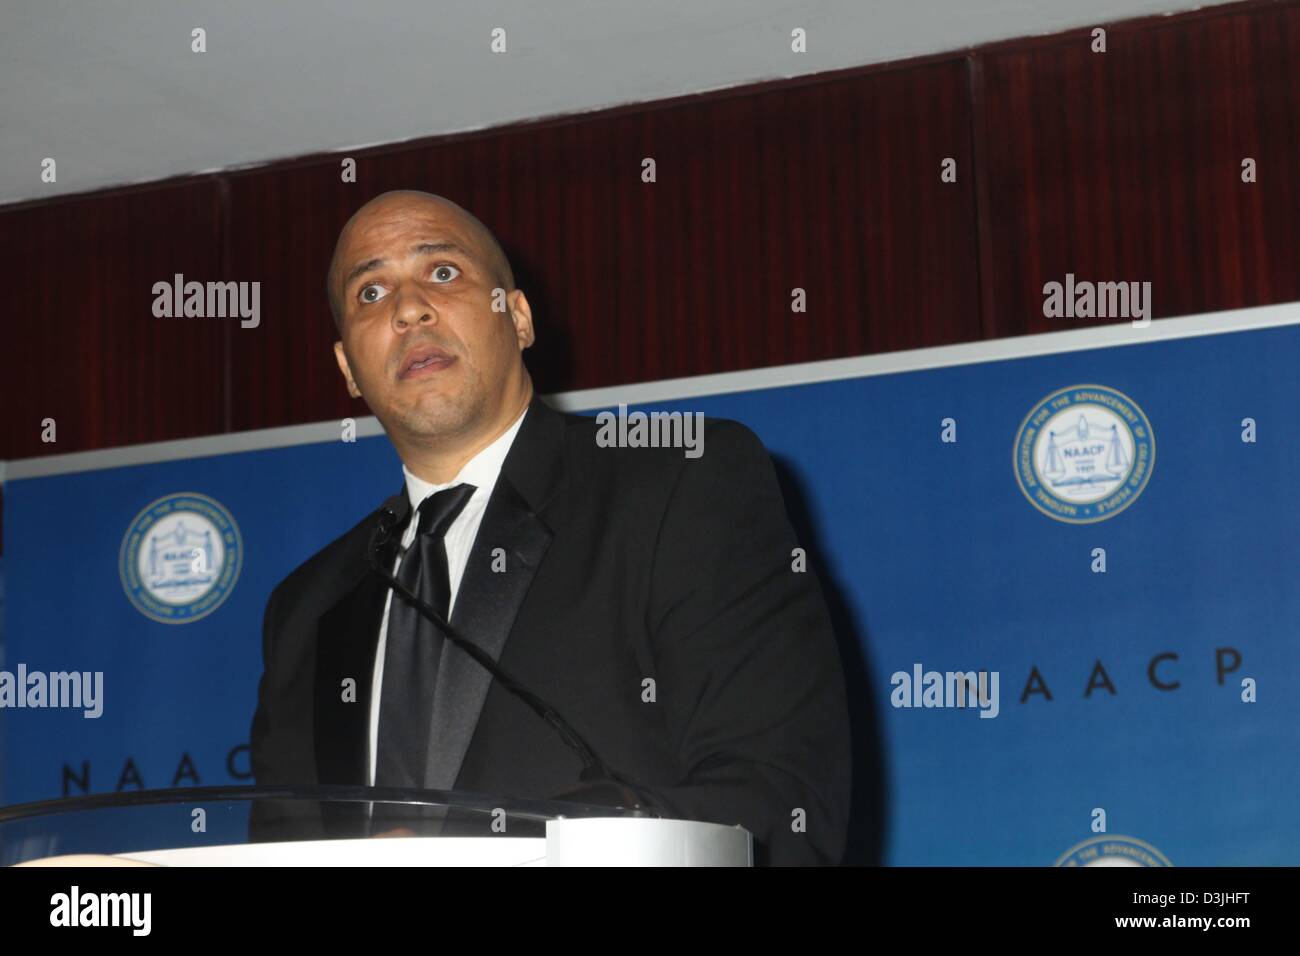 Feb. 15, 2013 - New York, New York, U.S. - EXCLUSIVE MAYOR CORY BOOKER OF NEWARK NEW JERSEY ATTENDS THE 97TH SPINGARN AWARD DINNER MARRIOTT MARQUIS HOTEL NYC 0N 2/15/2013.(Credit Image: © Mitchell Levy/Globe Photos/ZUMAPRESS.com) Stock Photo